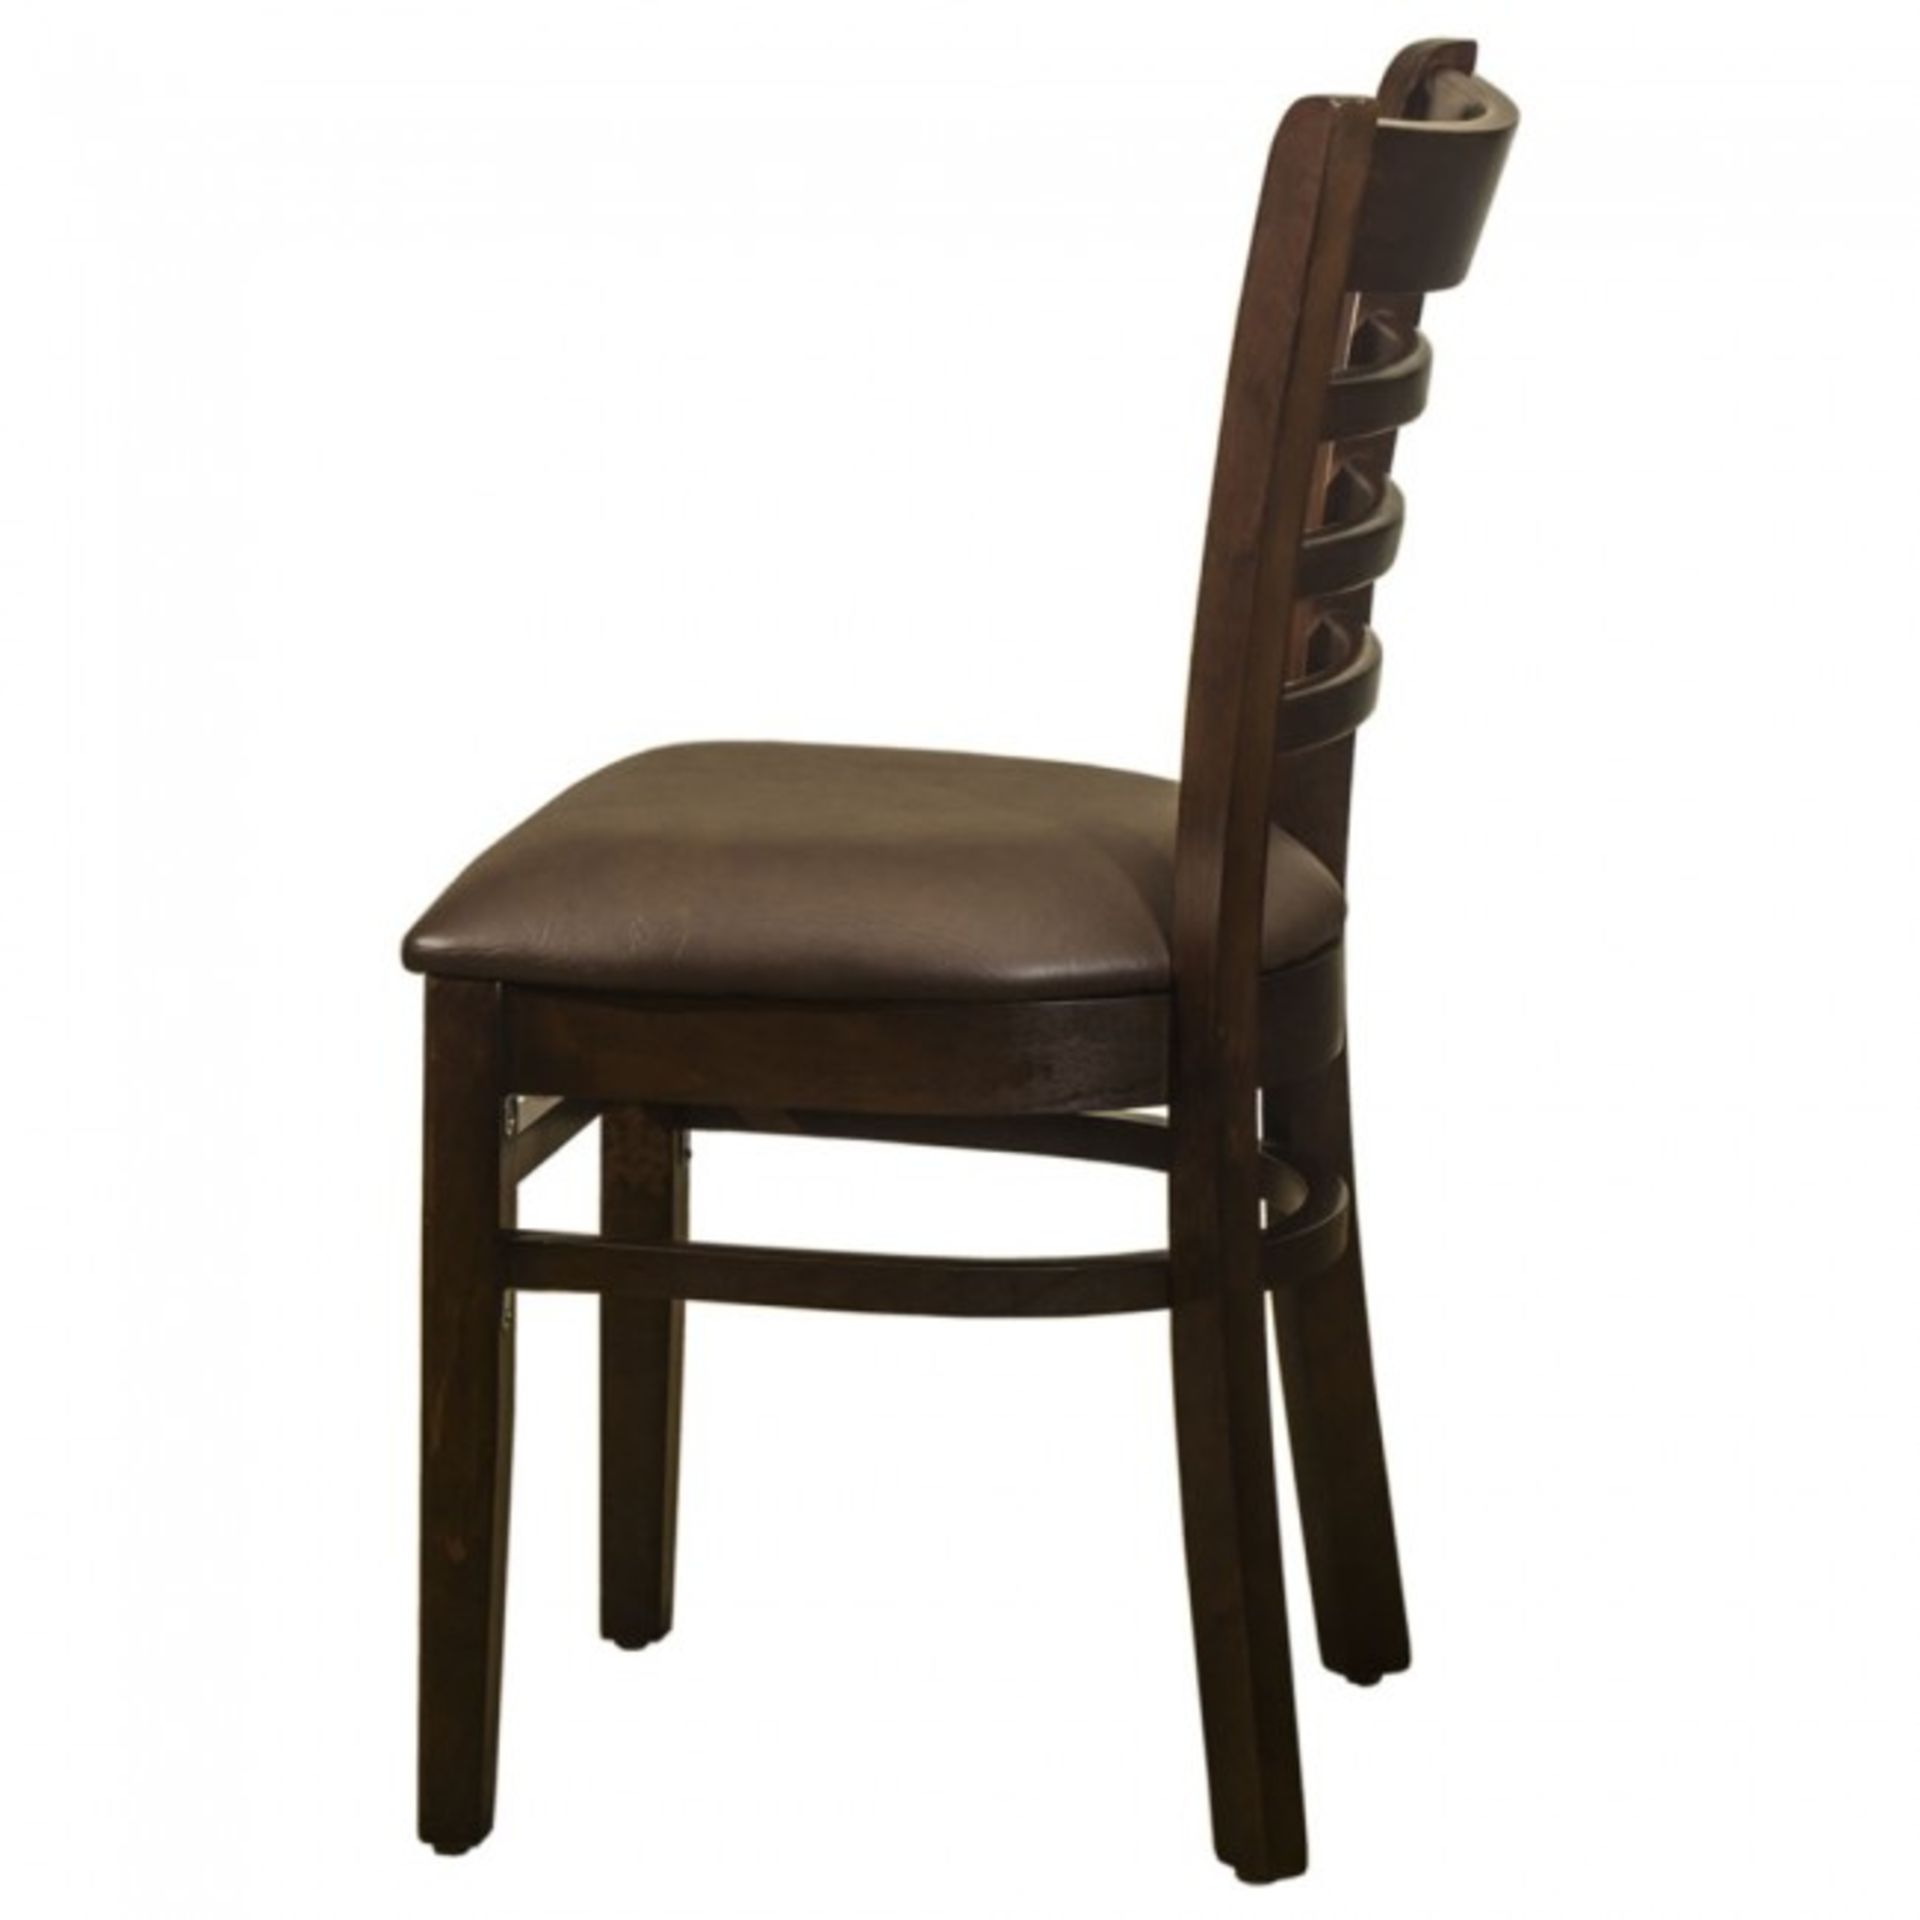 10 x Brand New Restaurant Chair - Walnut Finish - Solid Beech Frame with Brown Faux Leather seat - Image 3 of 4